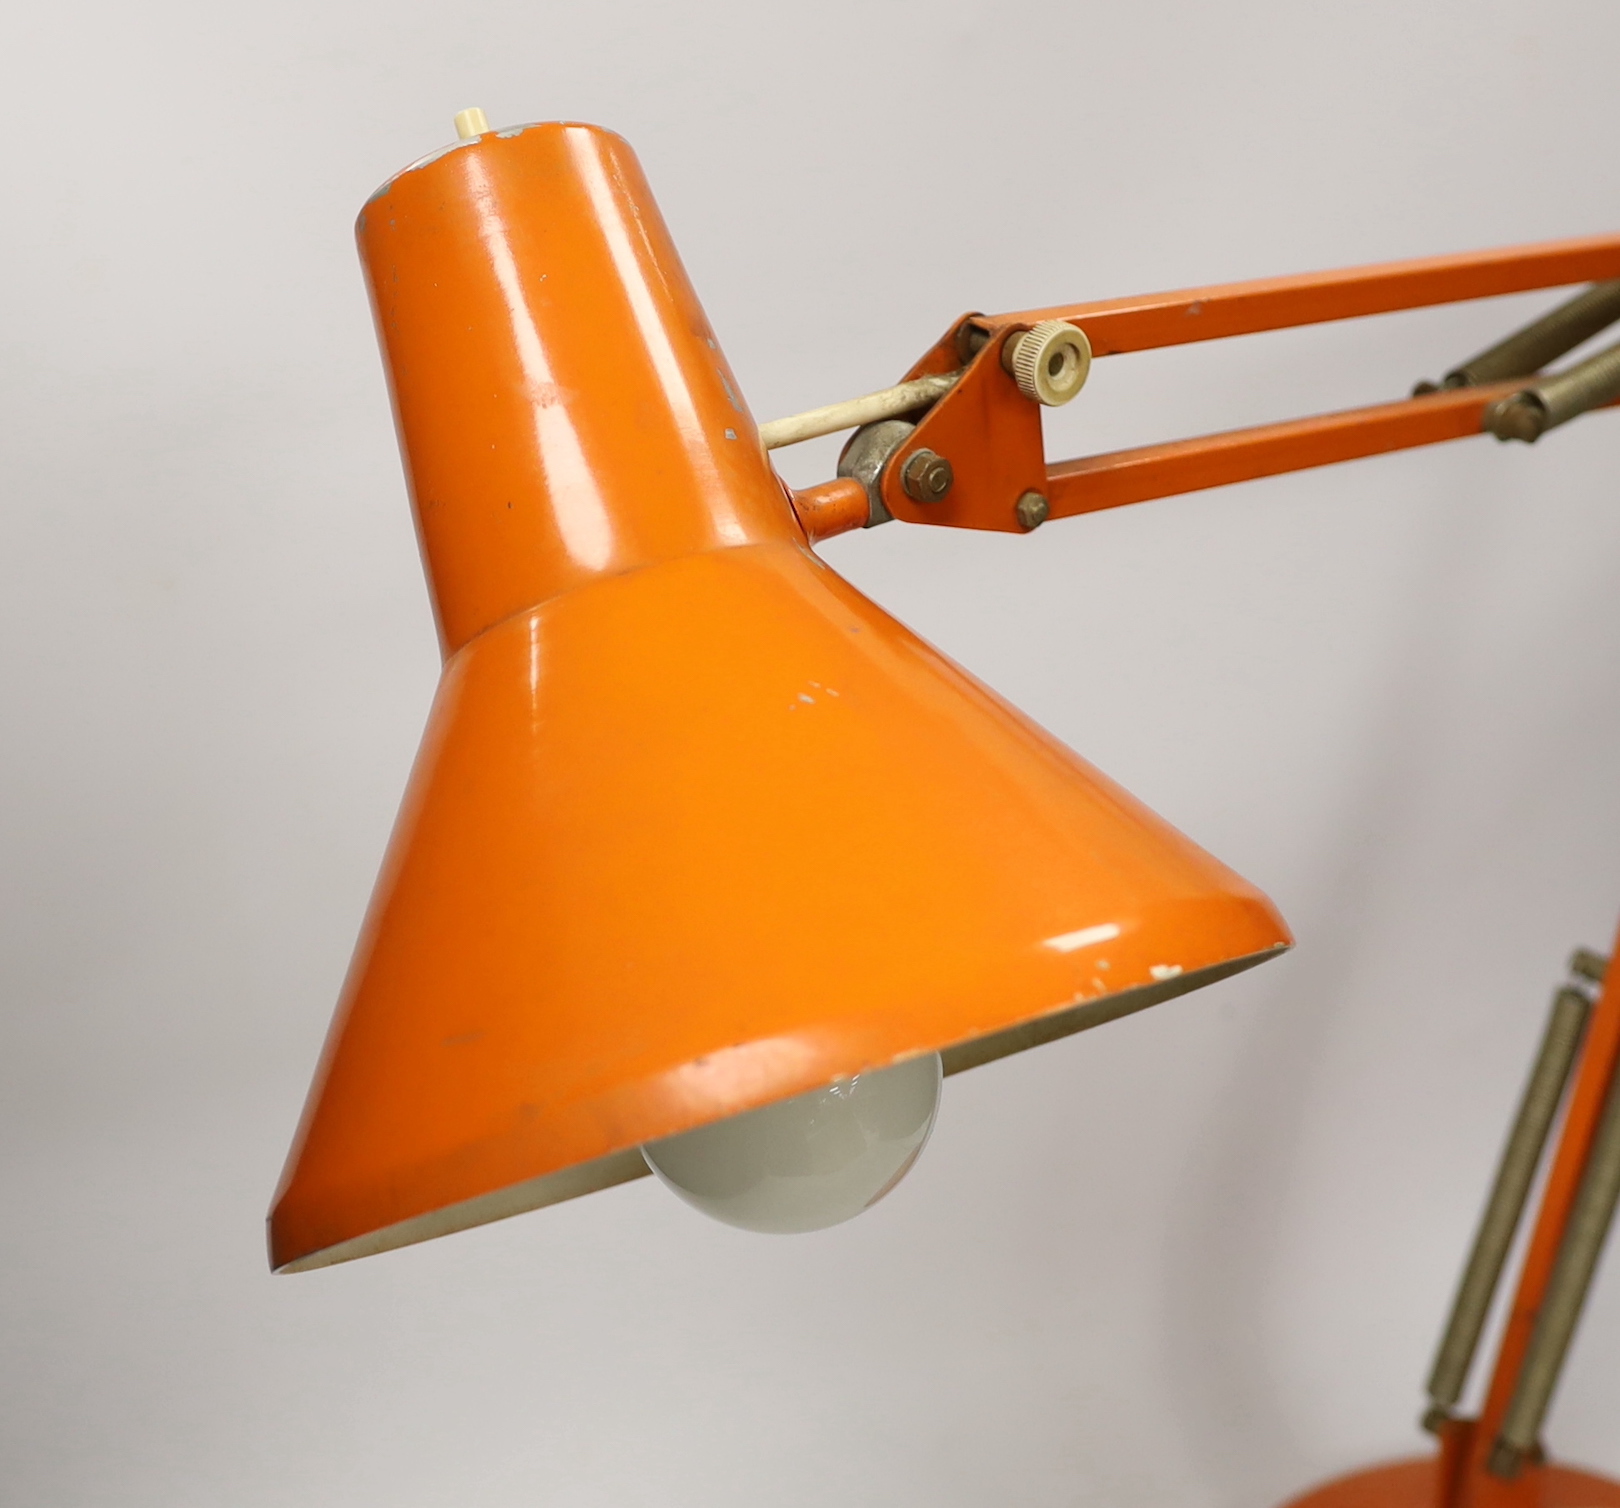 An orange Thousand and One Lamps Ltd angle poise lamp, approximately 76cm high